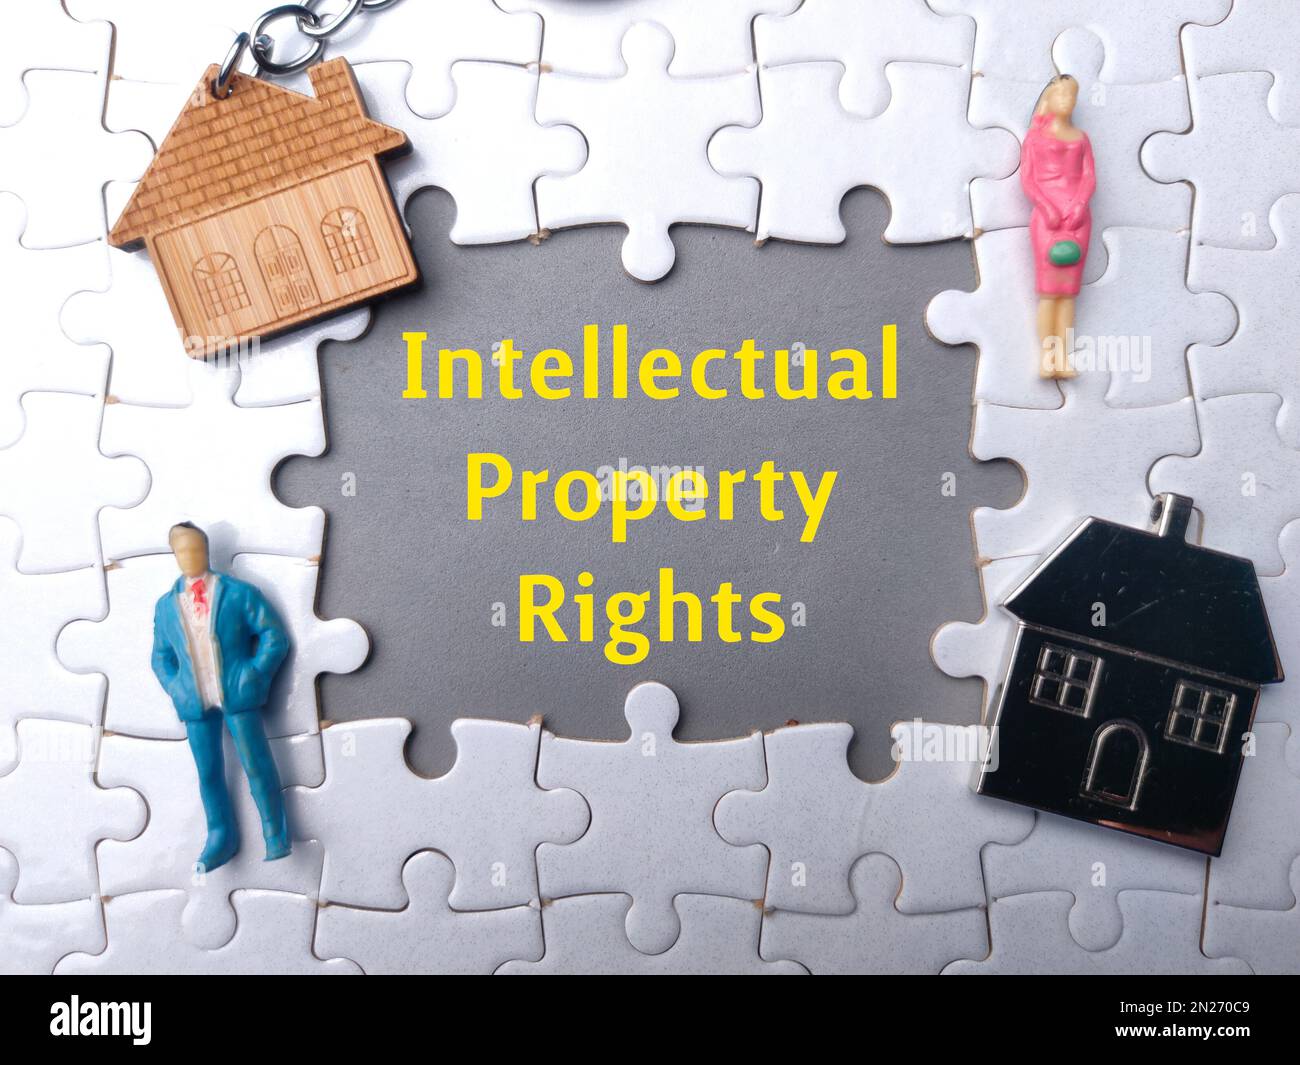 Text Intellectual Property Rights mit Miniature People and Toys House. Geschäftskonzept Stockfoto